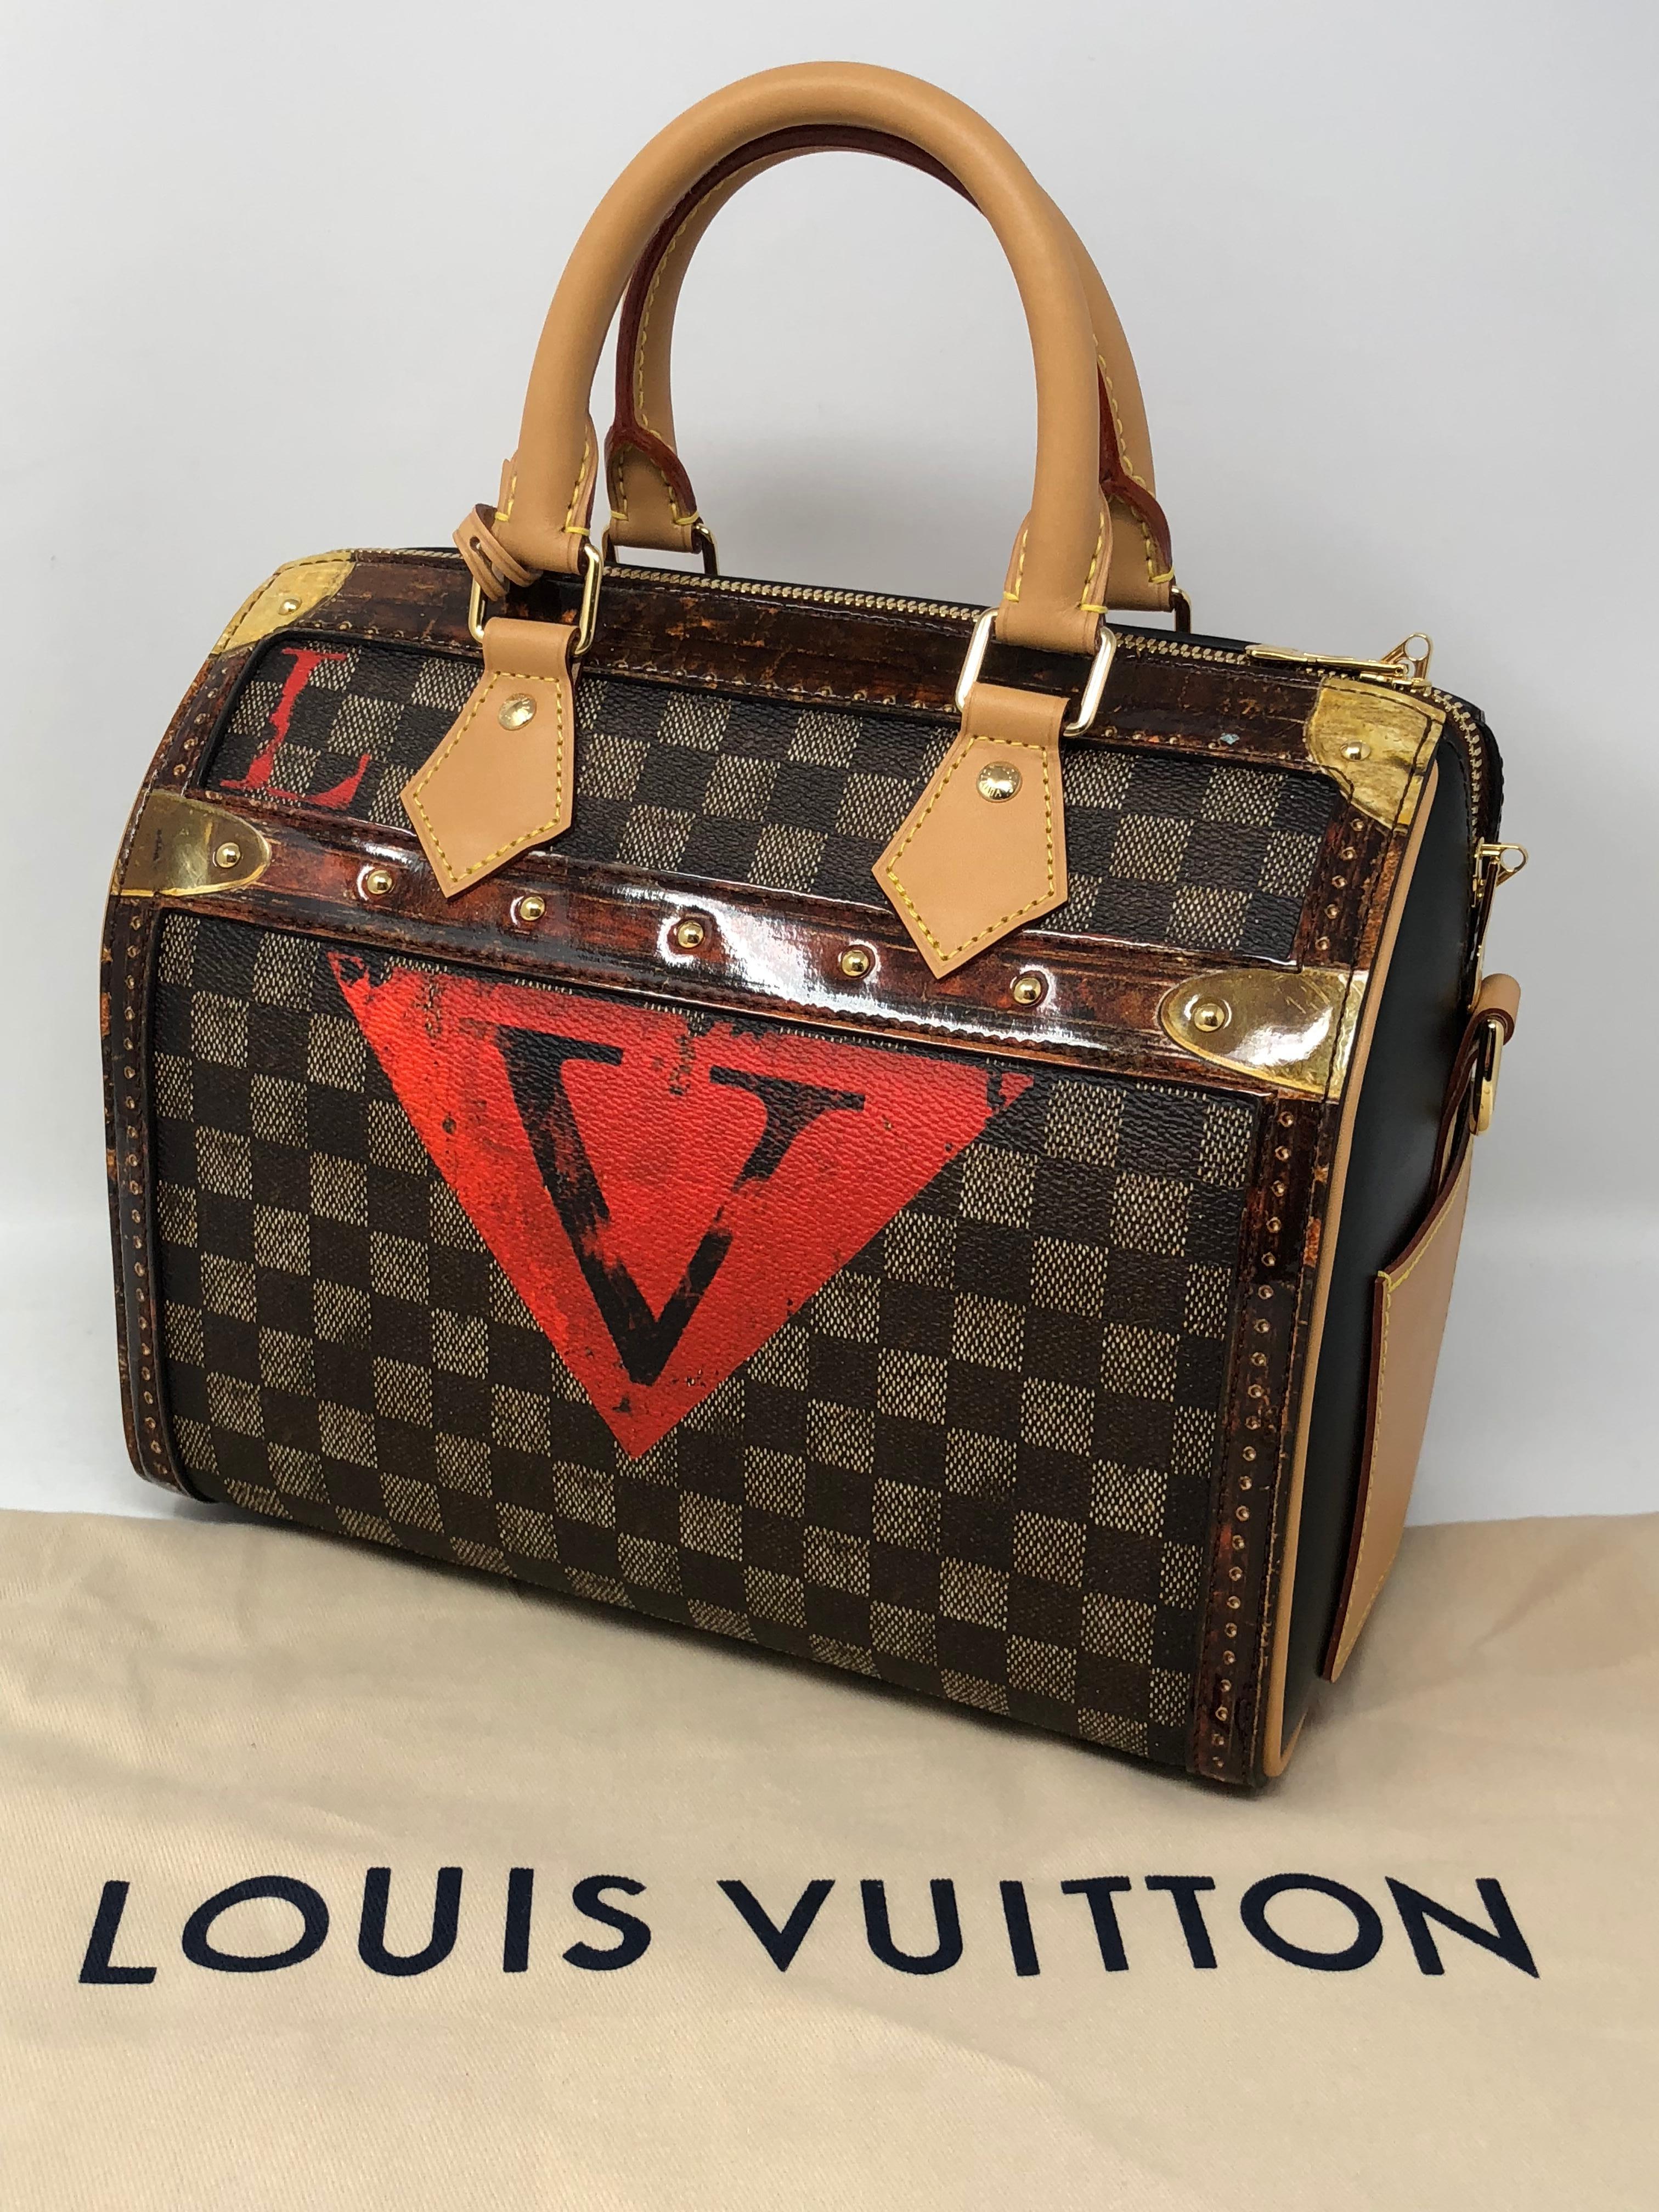 Louis Vuitton Time Trunk Speedy 25 Bandouliere Noir. Sold out and limited. Hard to get Collector's piece. Fall/ Winter 2018 Collection. Trompe l'oeil details with luggage stickers create the House's homage to their trunks. The unique look makes this